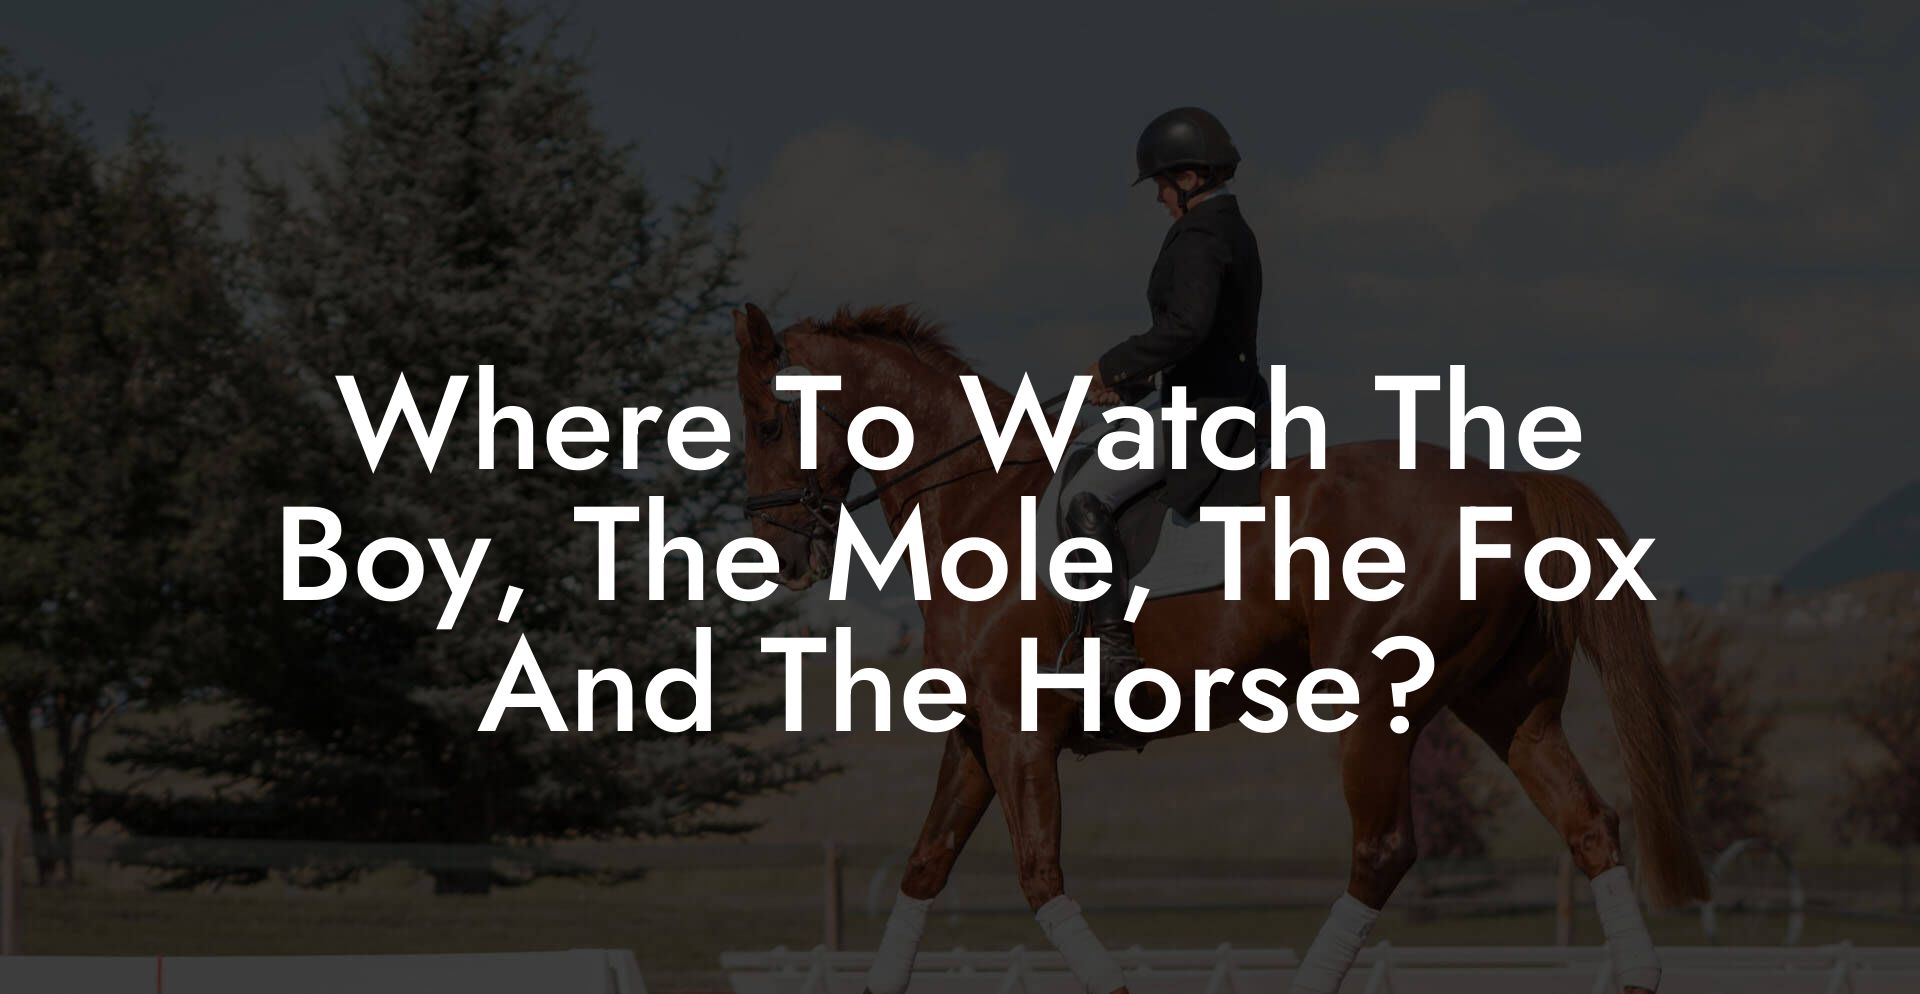 Where To Watch The Boy, The Mole, The Fox And The Horse?